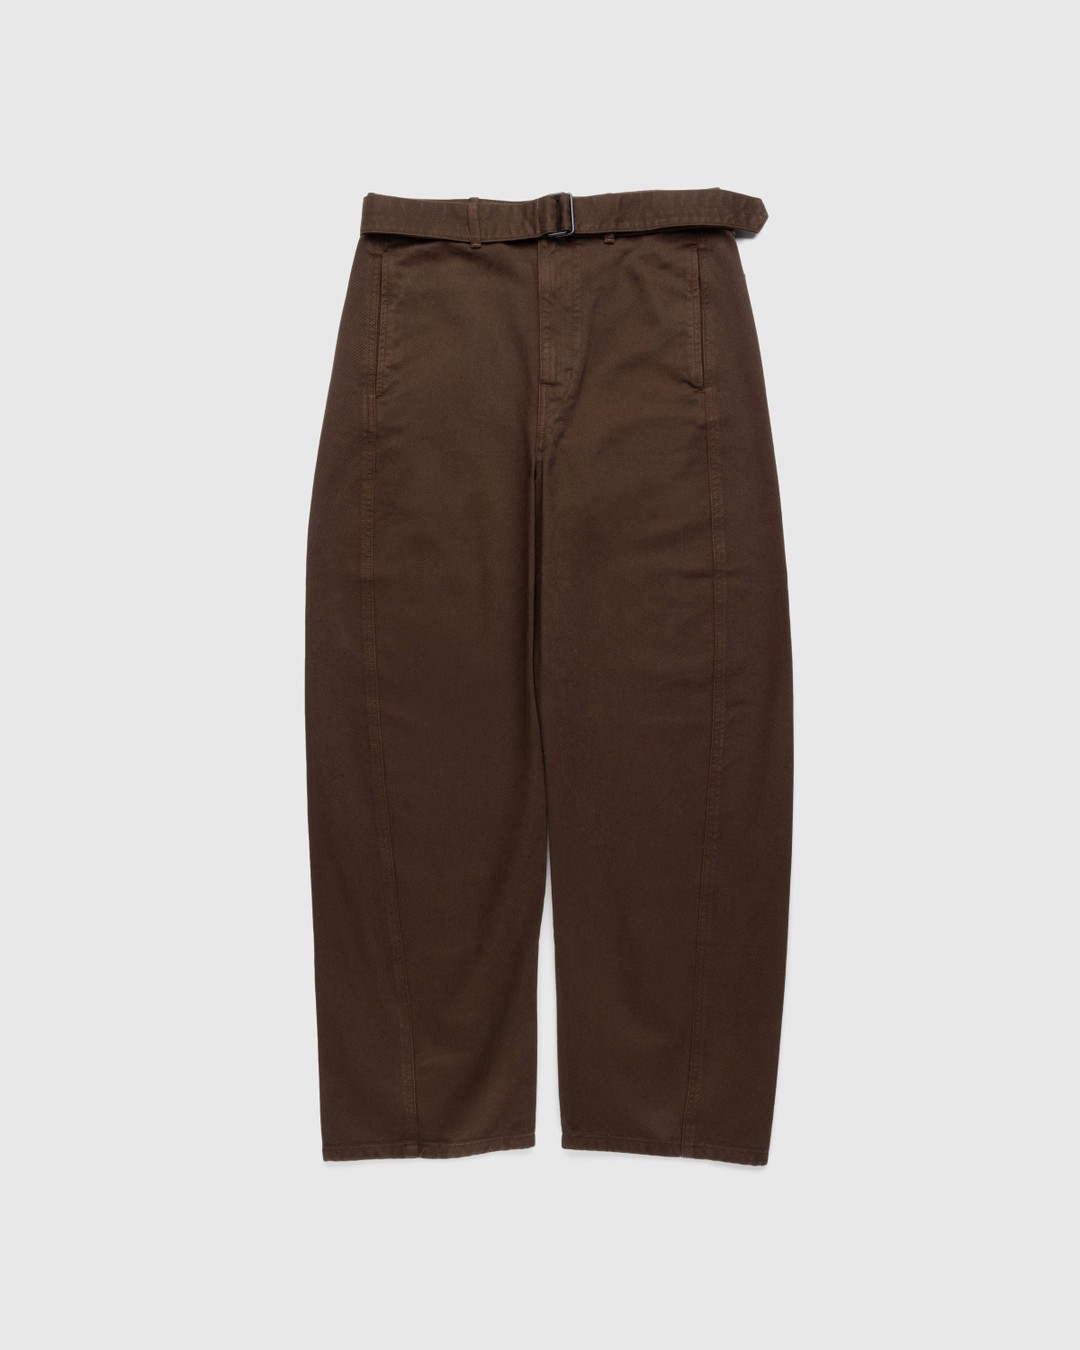 Lemaire – Twisted Belted Casual Pant - Pants - Brown - Image 1